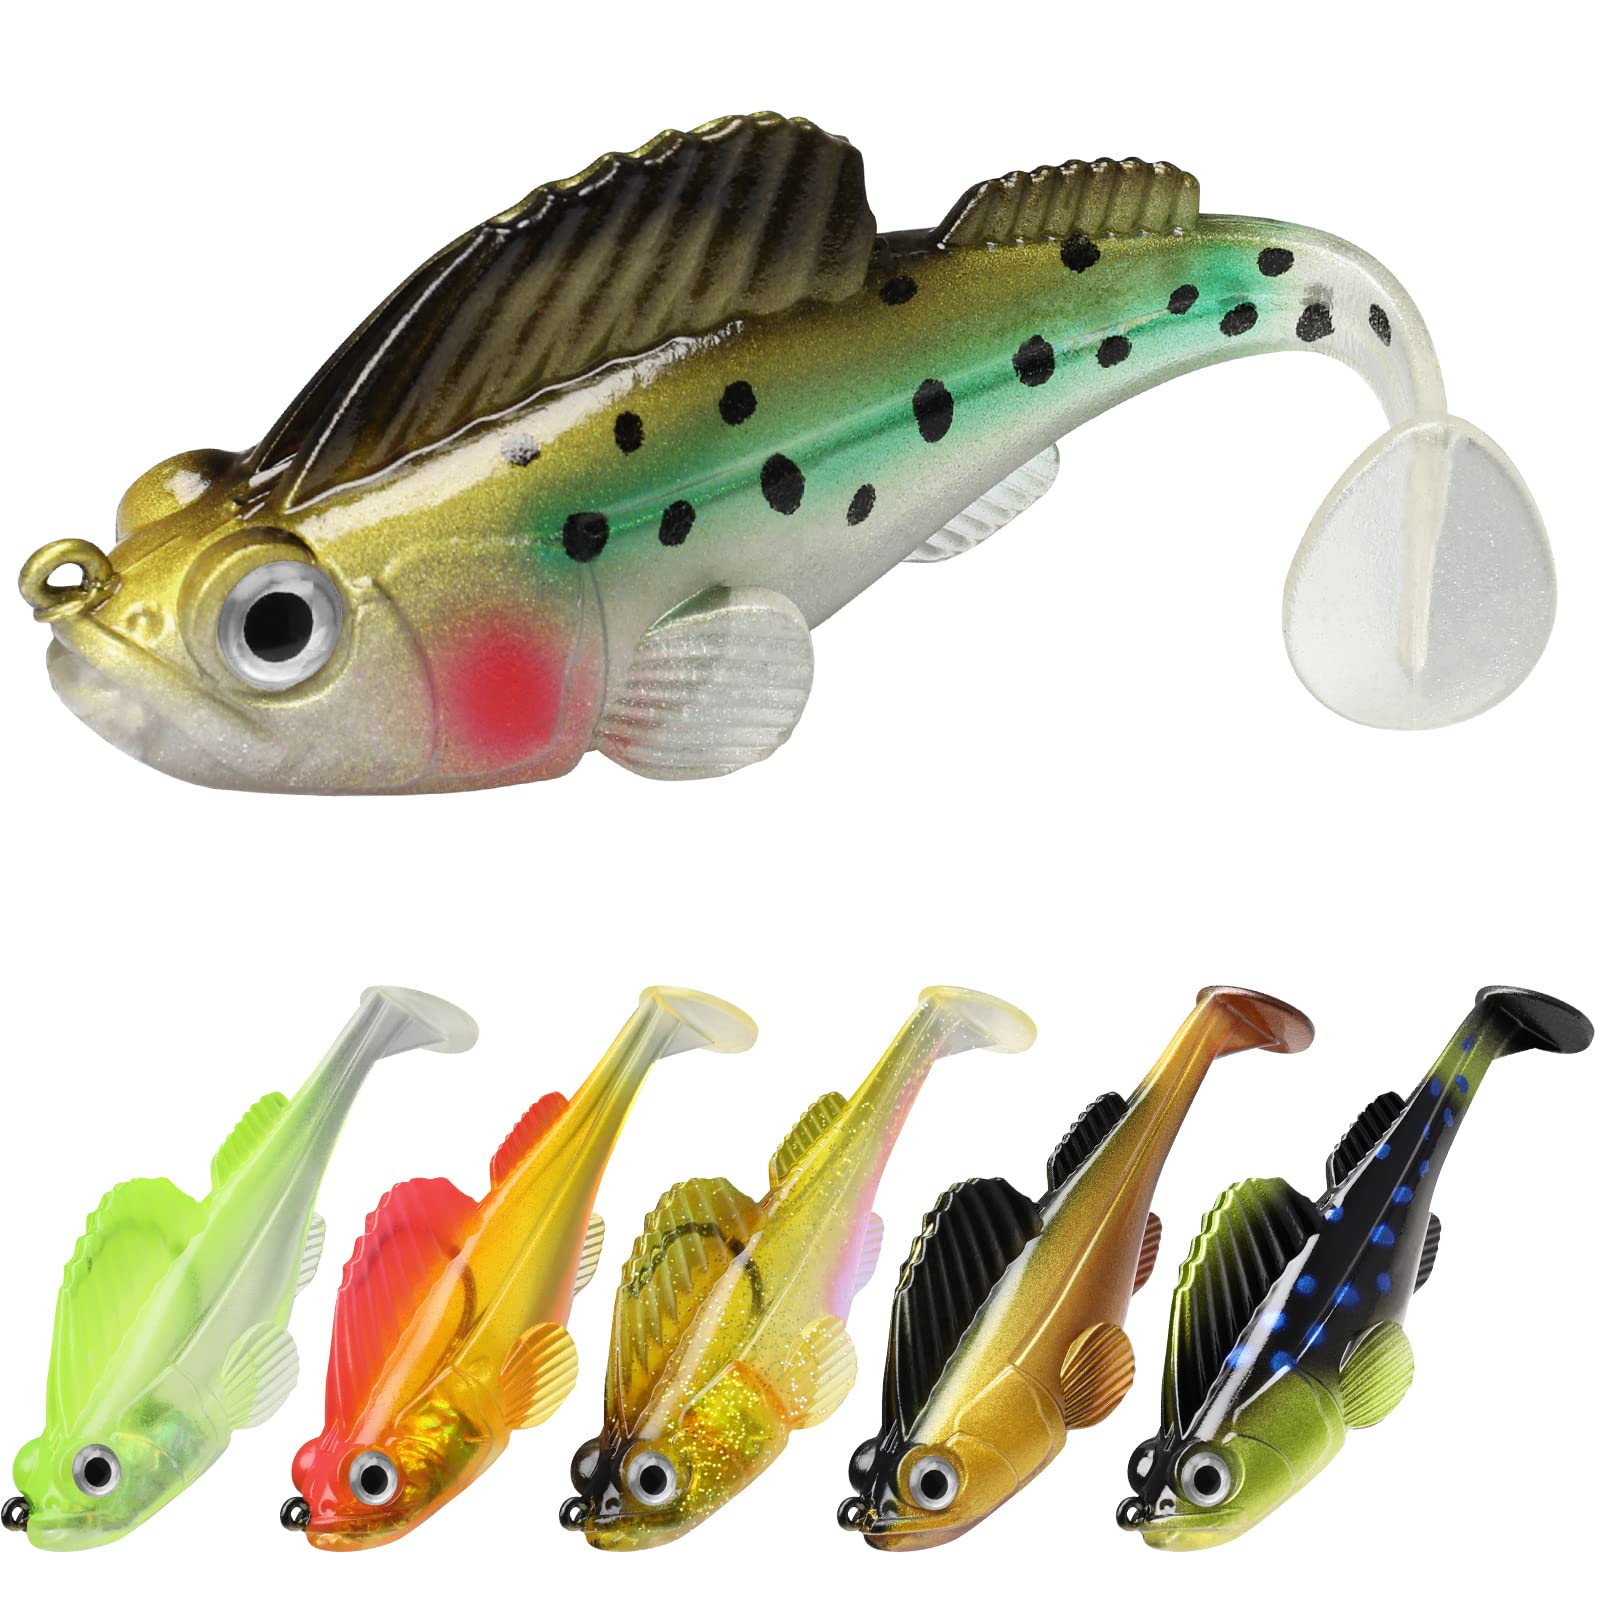 Aofa 12cm/15g Soft Fishing Lures for Bass Jig Head Fishing Soft Plastic  Lures with Hook Sinking Swimbaits for Saltwater and Freshwater Fishing Lures  Kit 